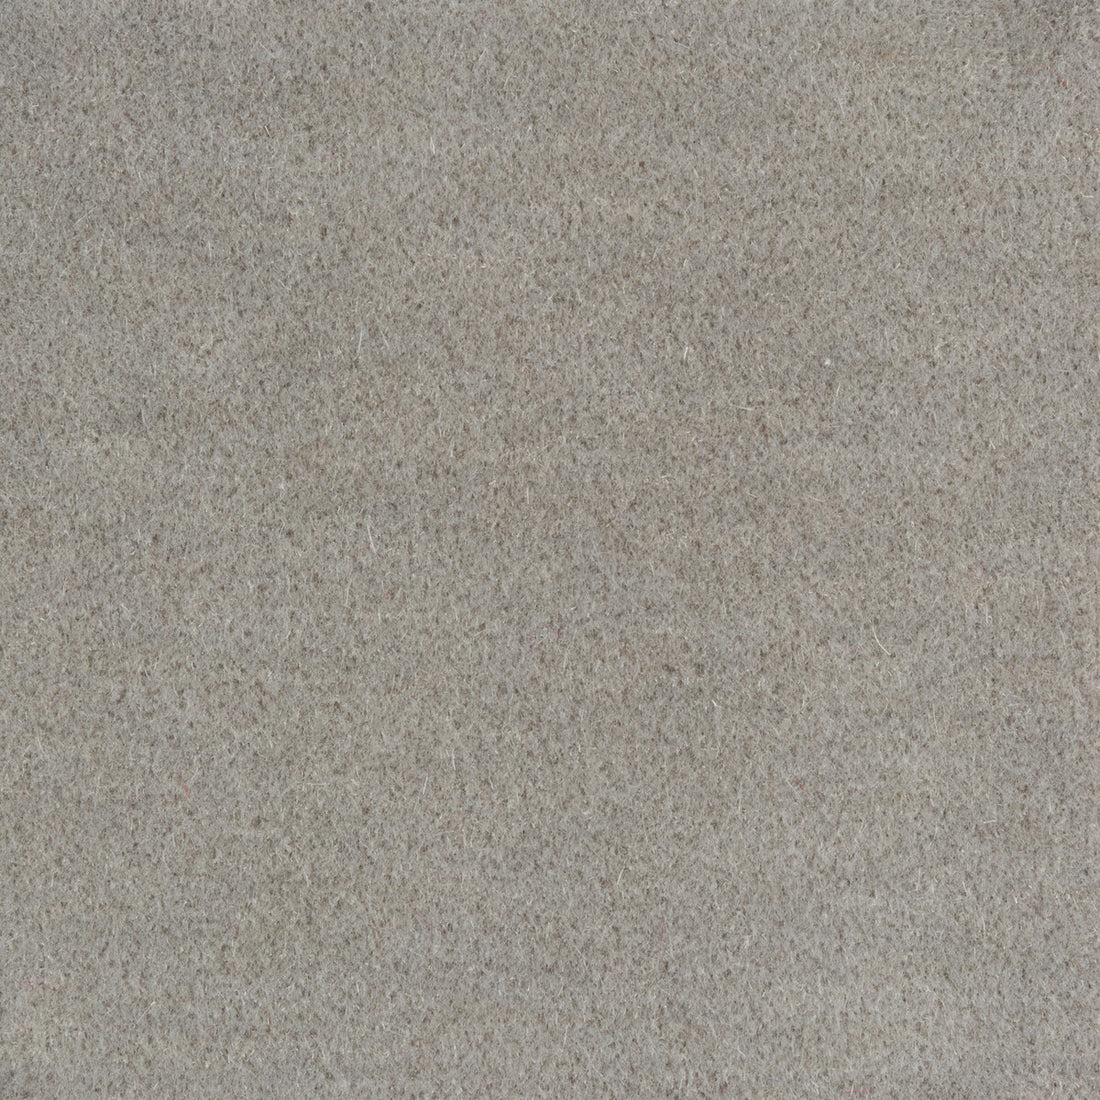 Bachelor Mohair fabric in greystone color - pattern 8014101.1115.0 - by Brunschwig &amp; Fils